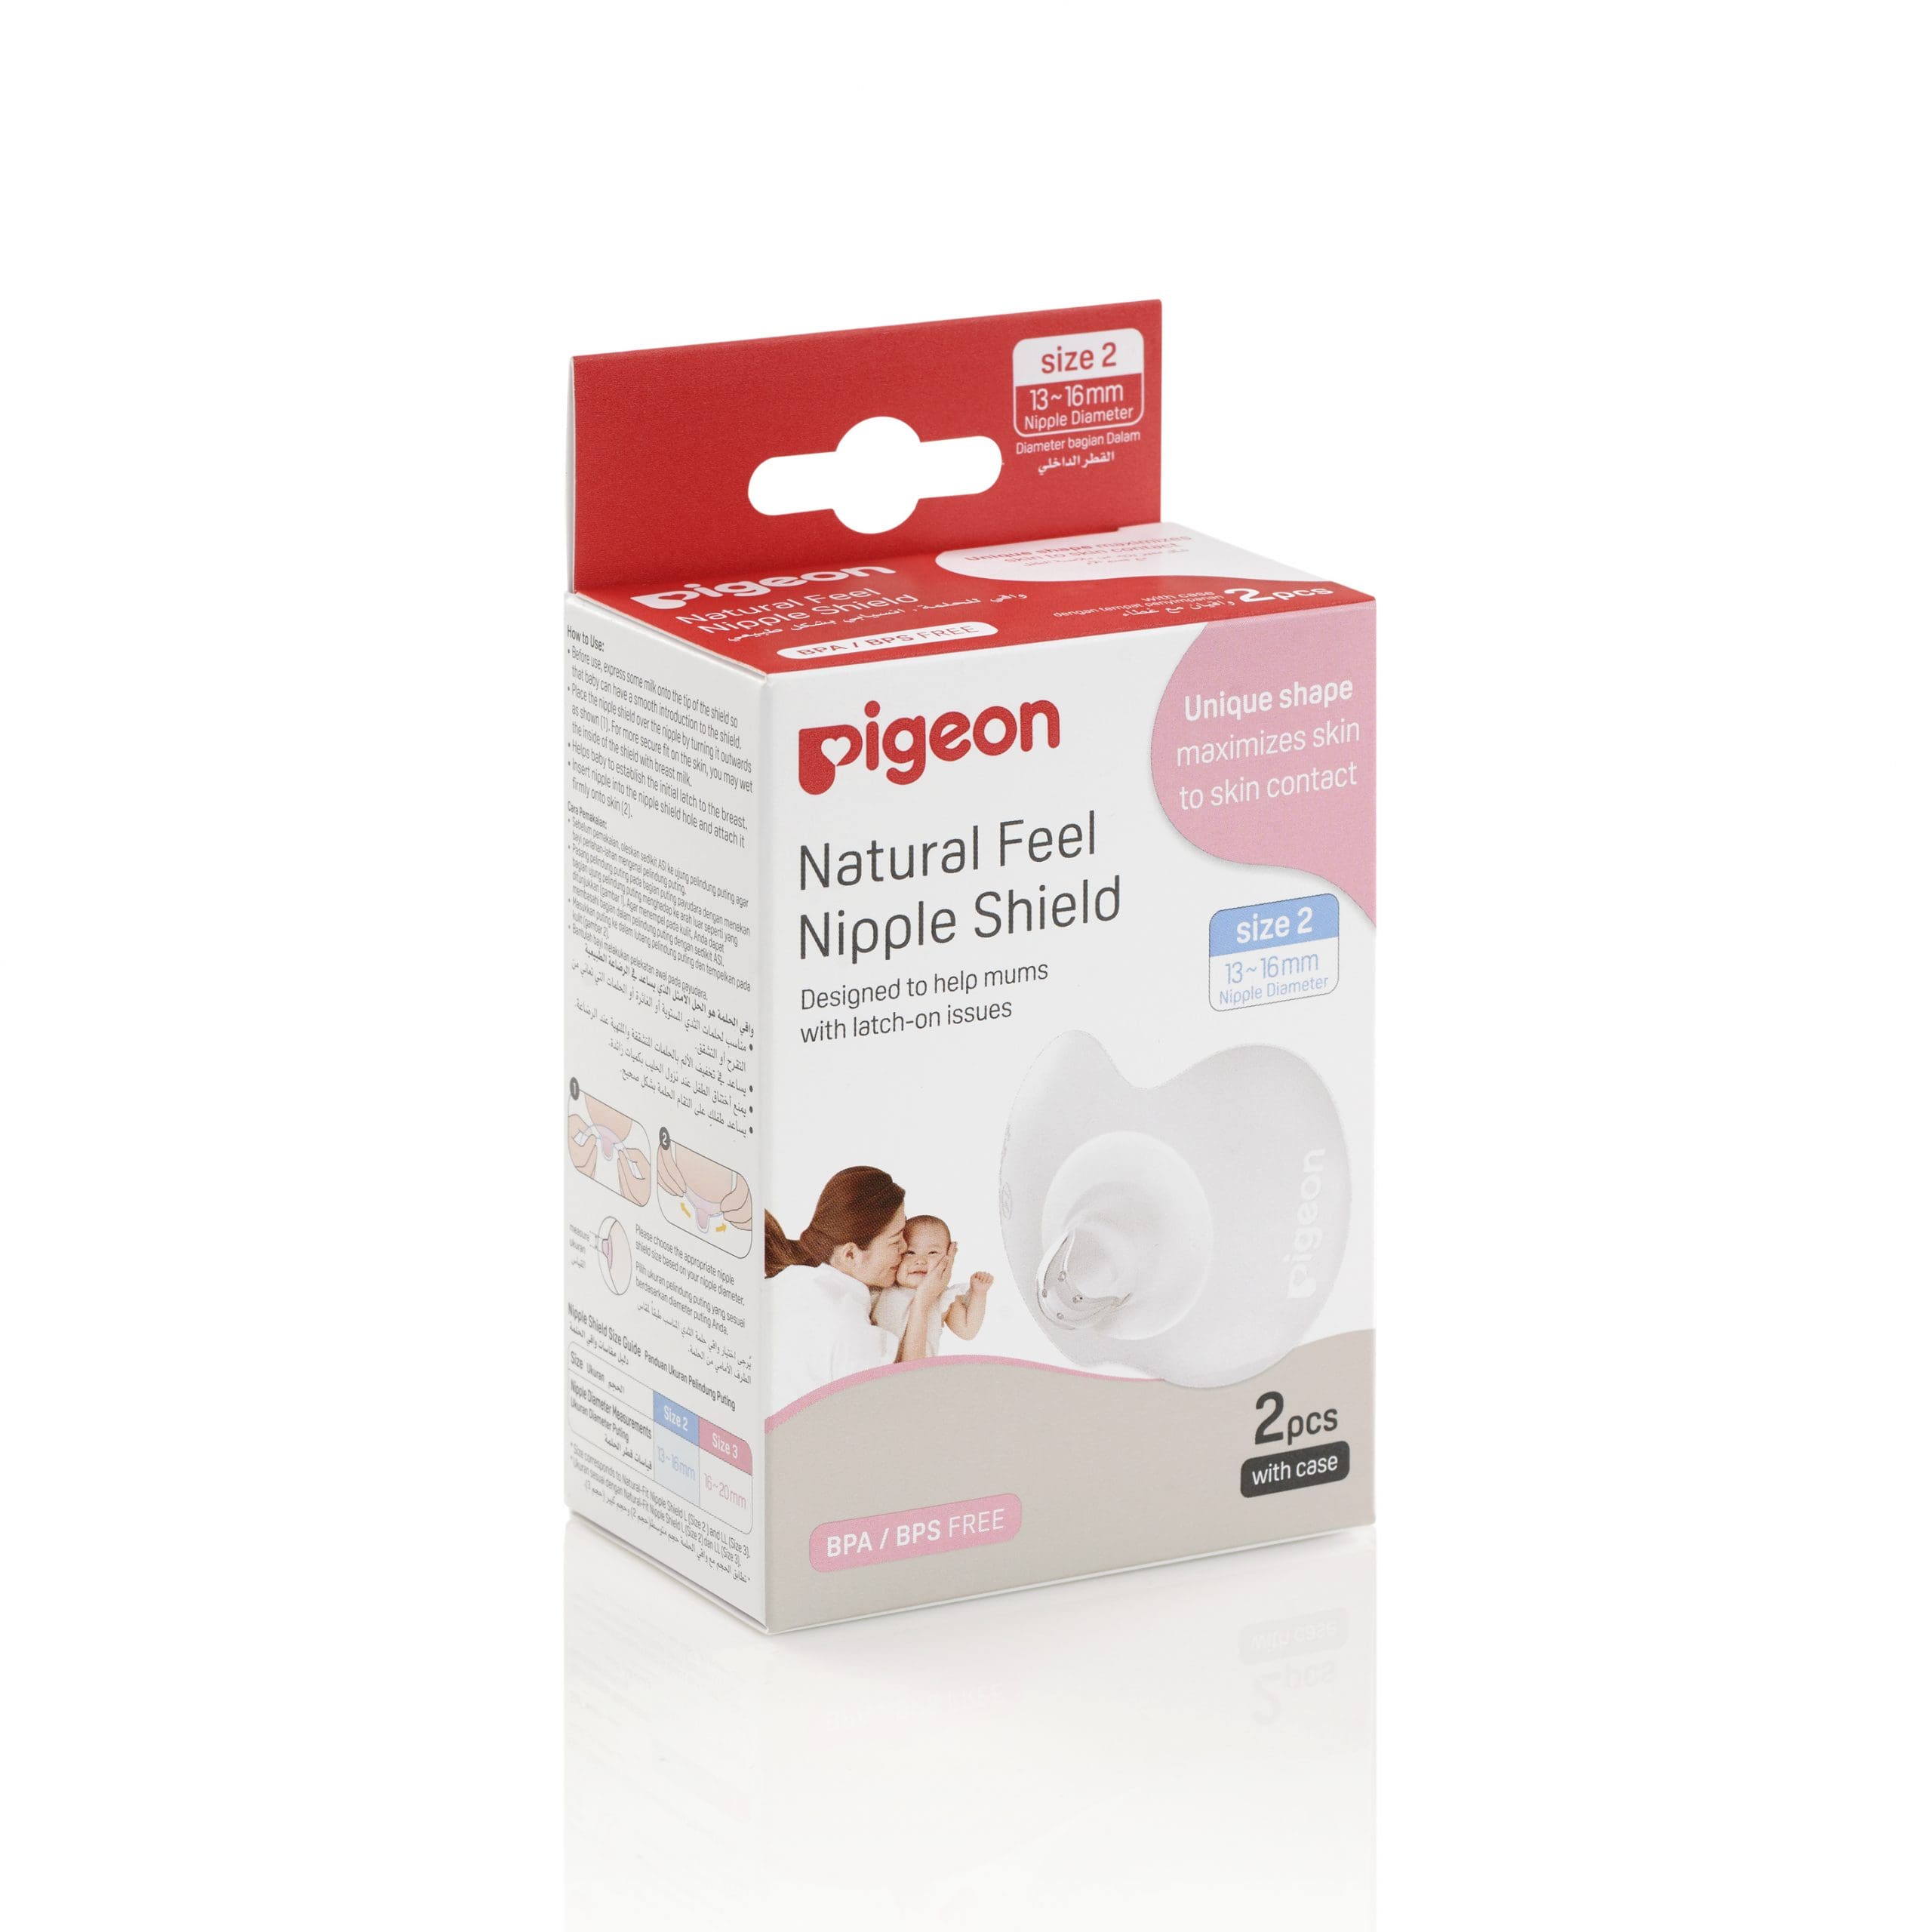 https://pigeon.com.sg/wp-content/uploads/2021/11/79318_Natural-Feel-Nipple-Shield-Size-2M_packaging_Angle-right-3000-x-3000-scaled.jpg